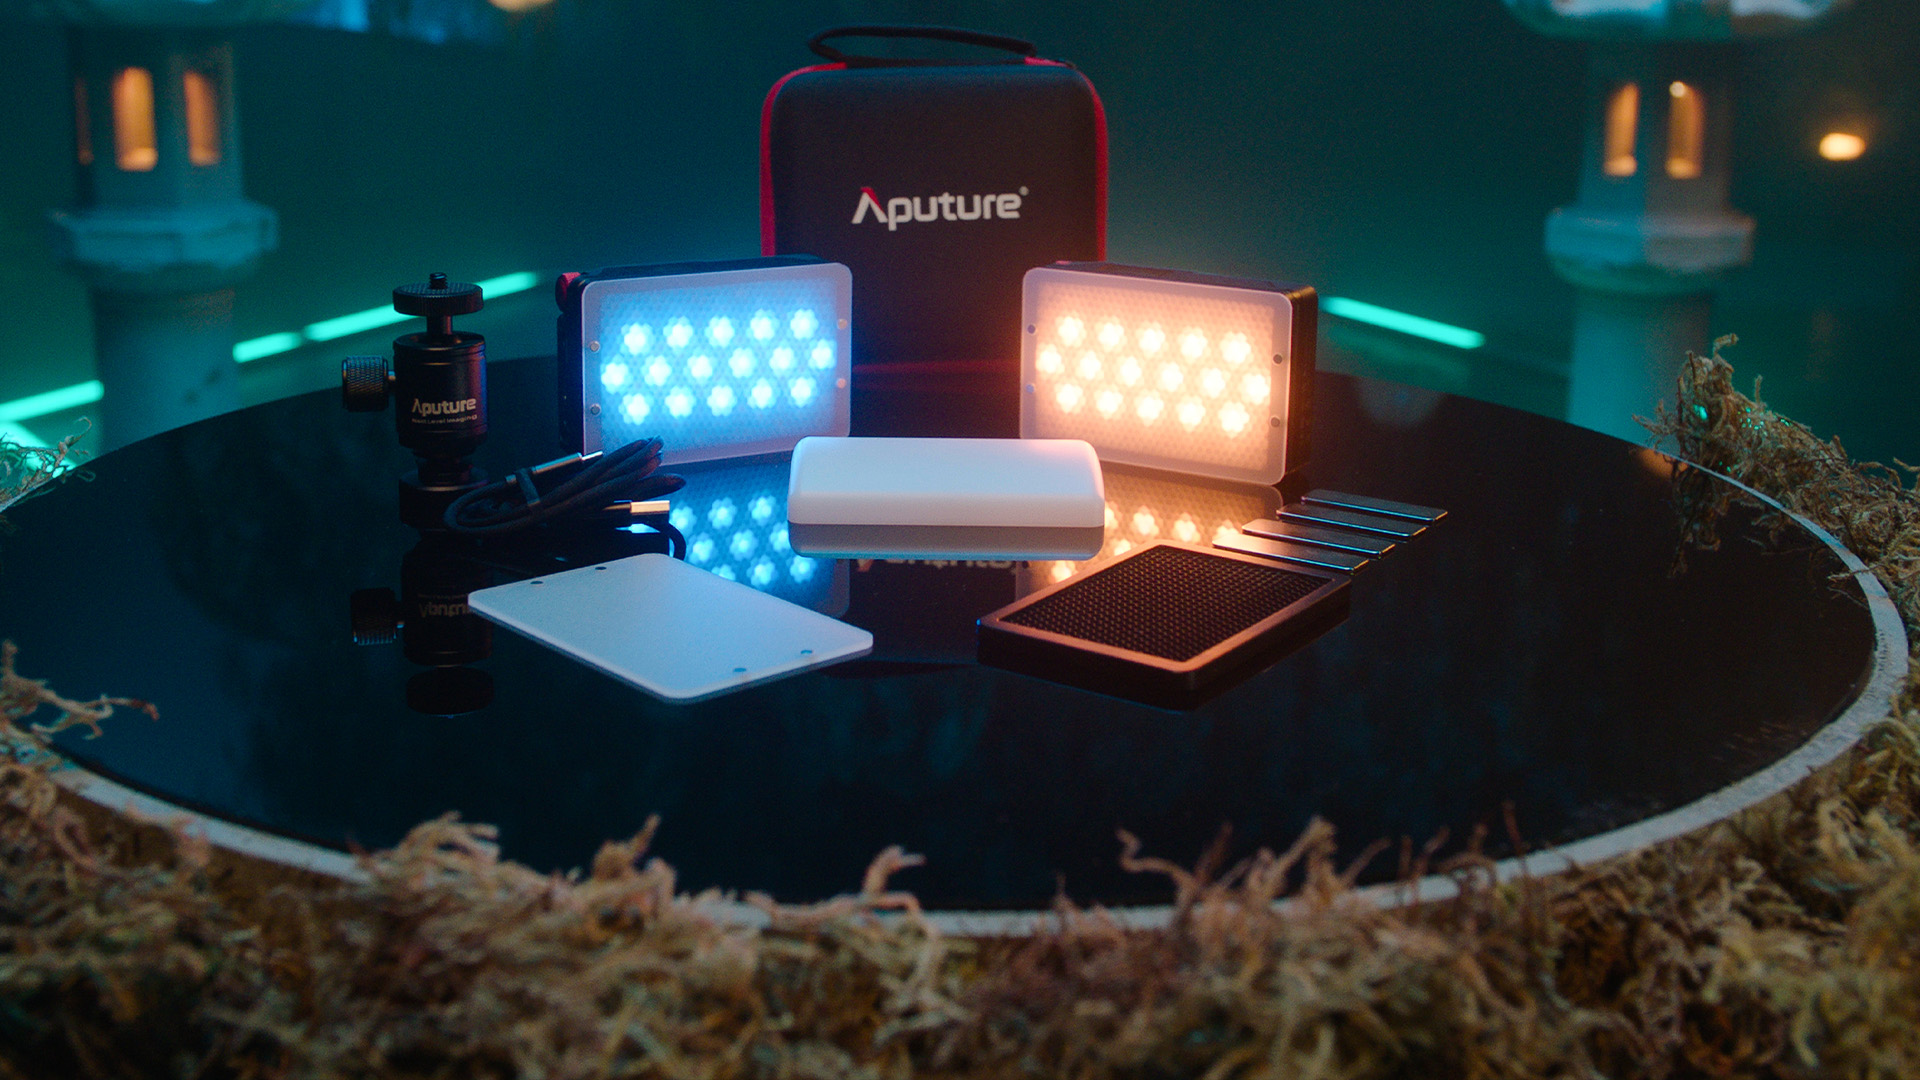 Aputure Pro. 4x brighter and available in light Kit -